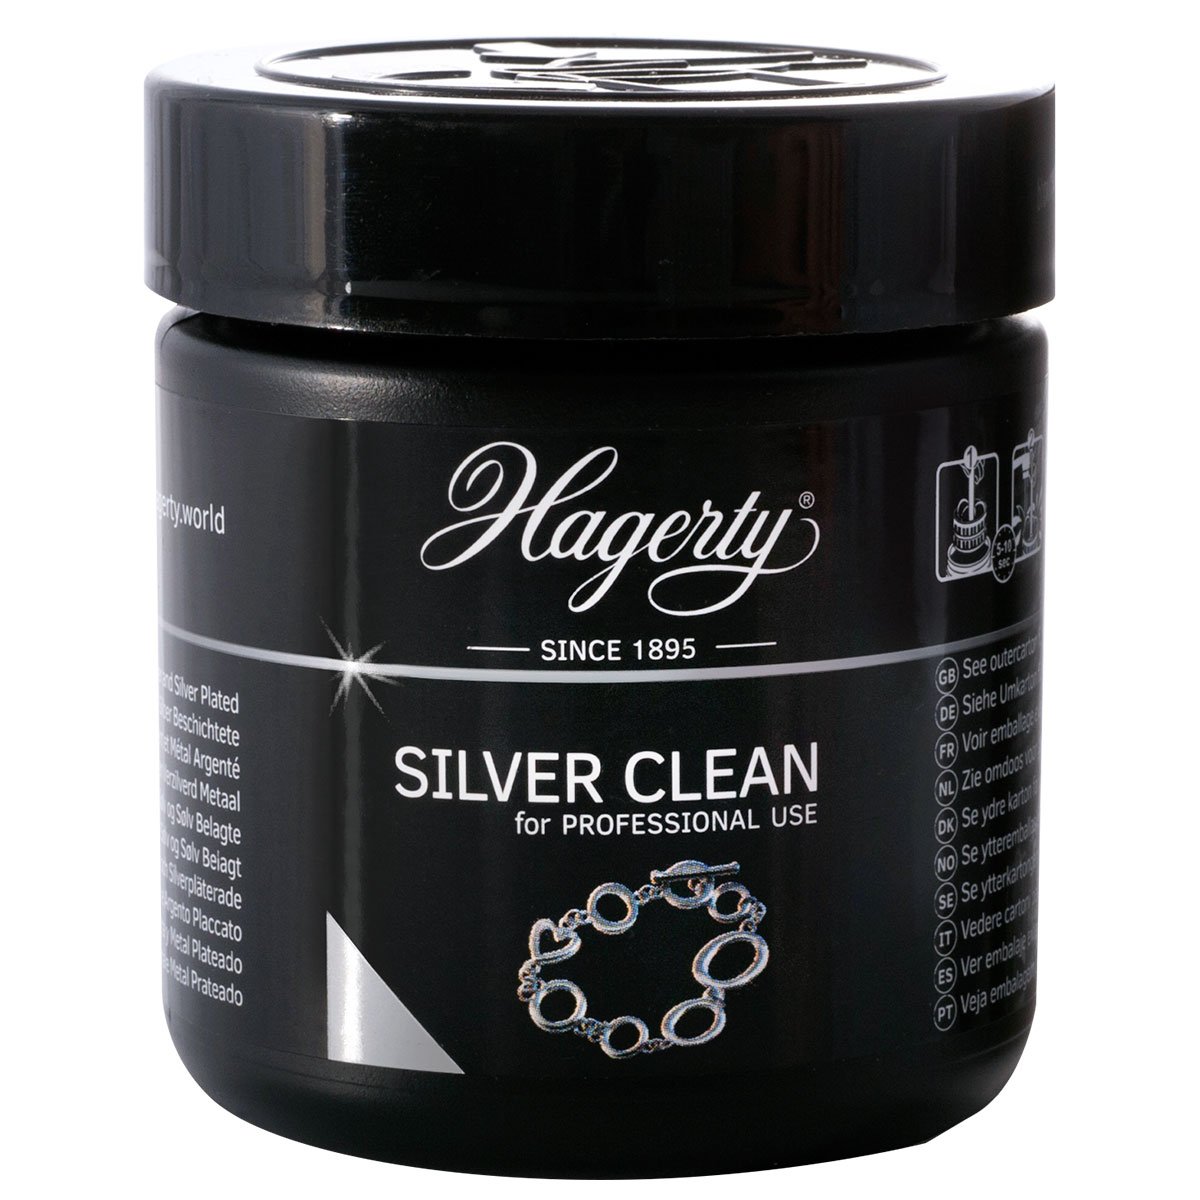 Hagerty Silver Clean Professional, dompelbad voor zilver, 170 ml